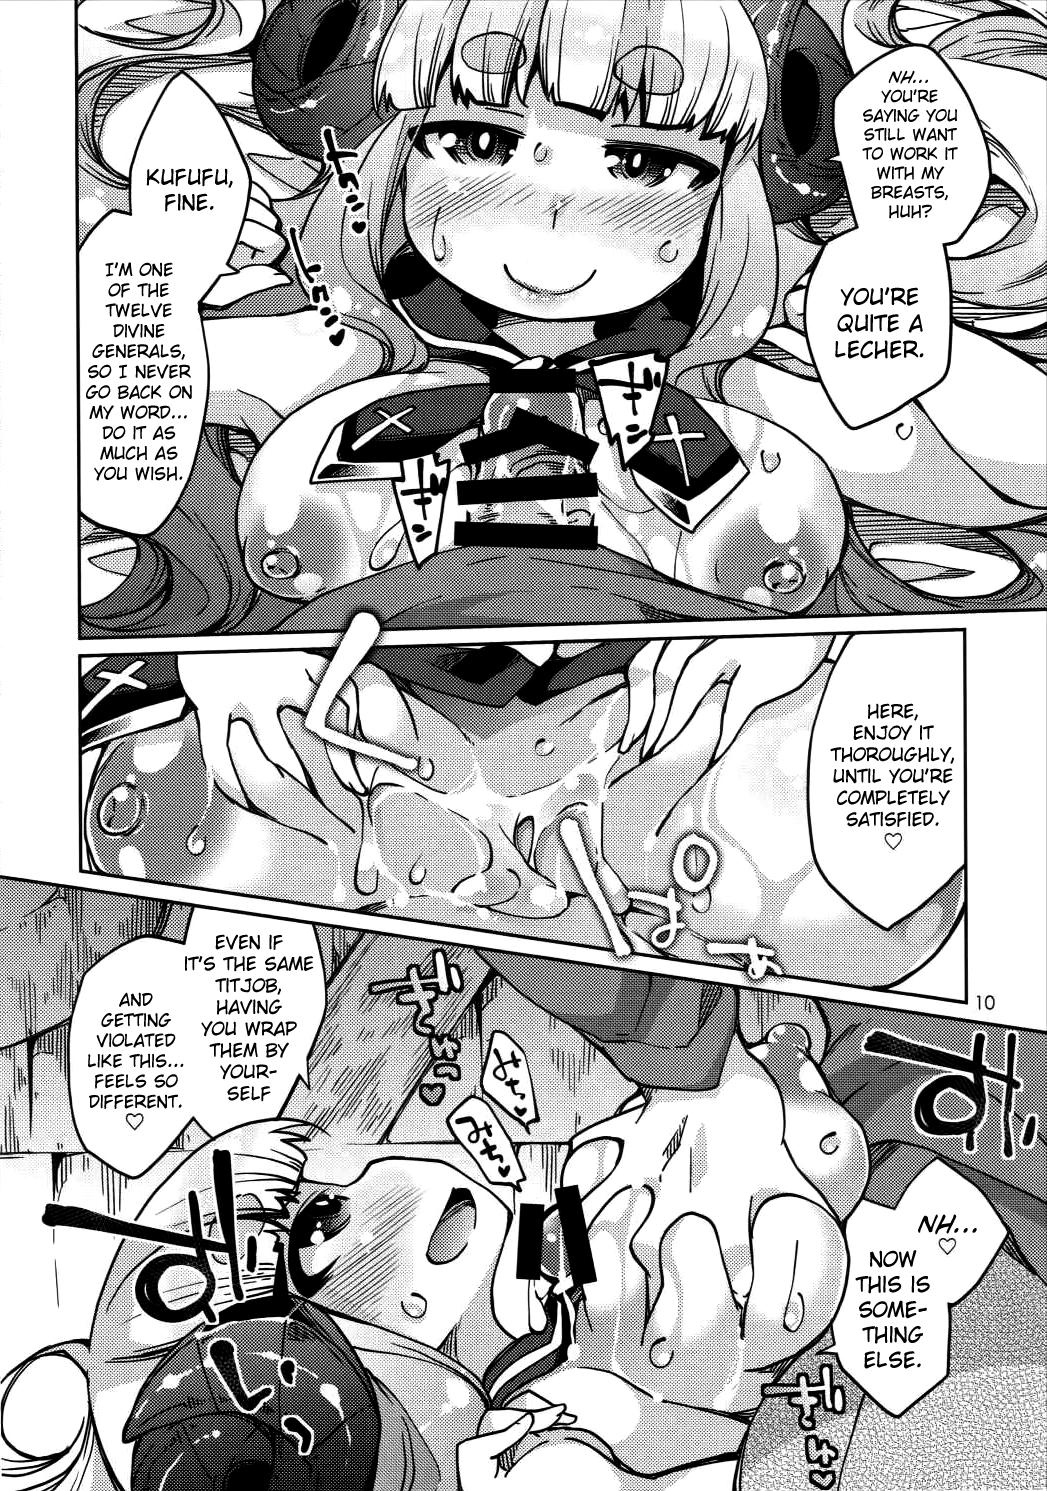 Bucetinha Sheep God and Naughty Captain - Granblue fantasy Sex Pussy - Page 9